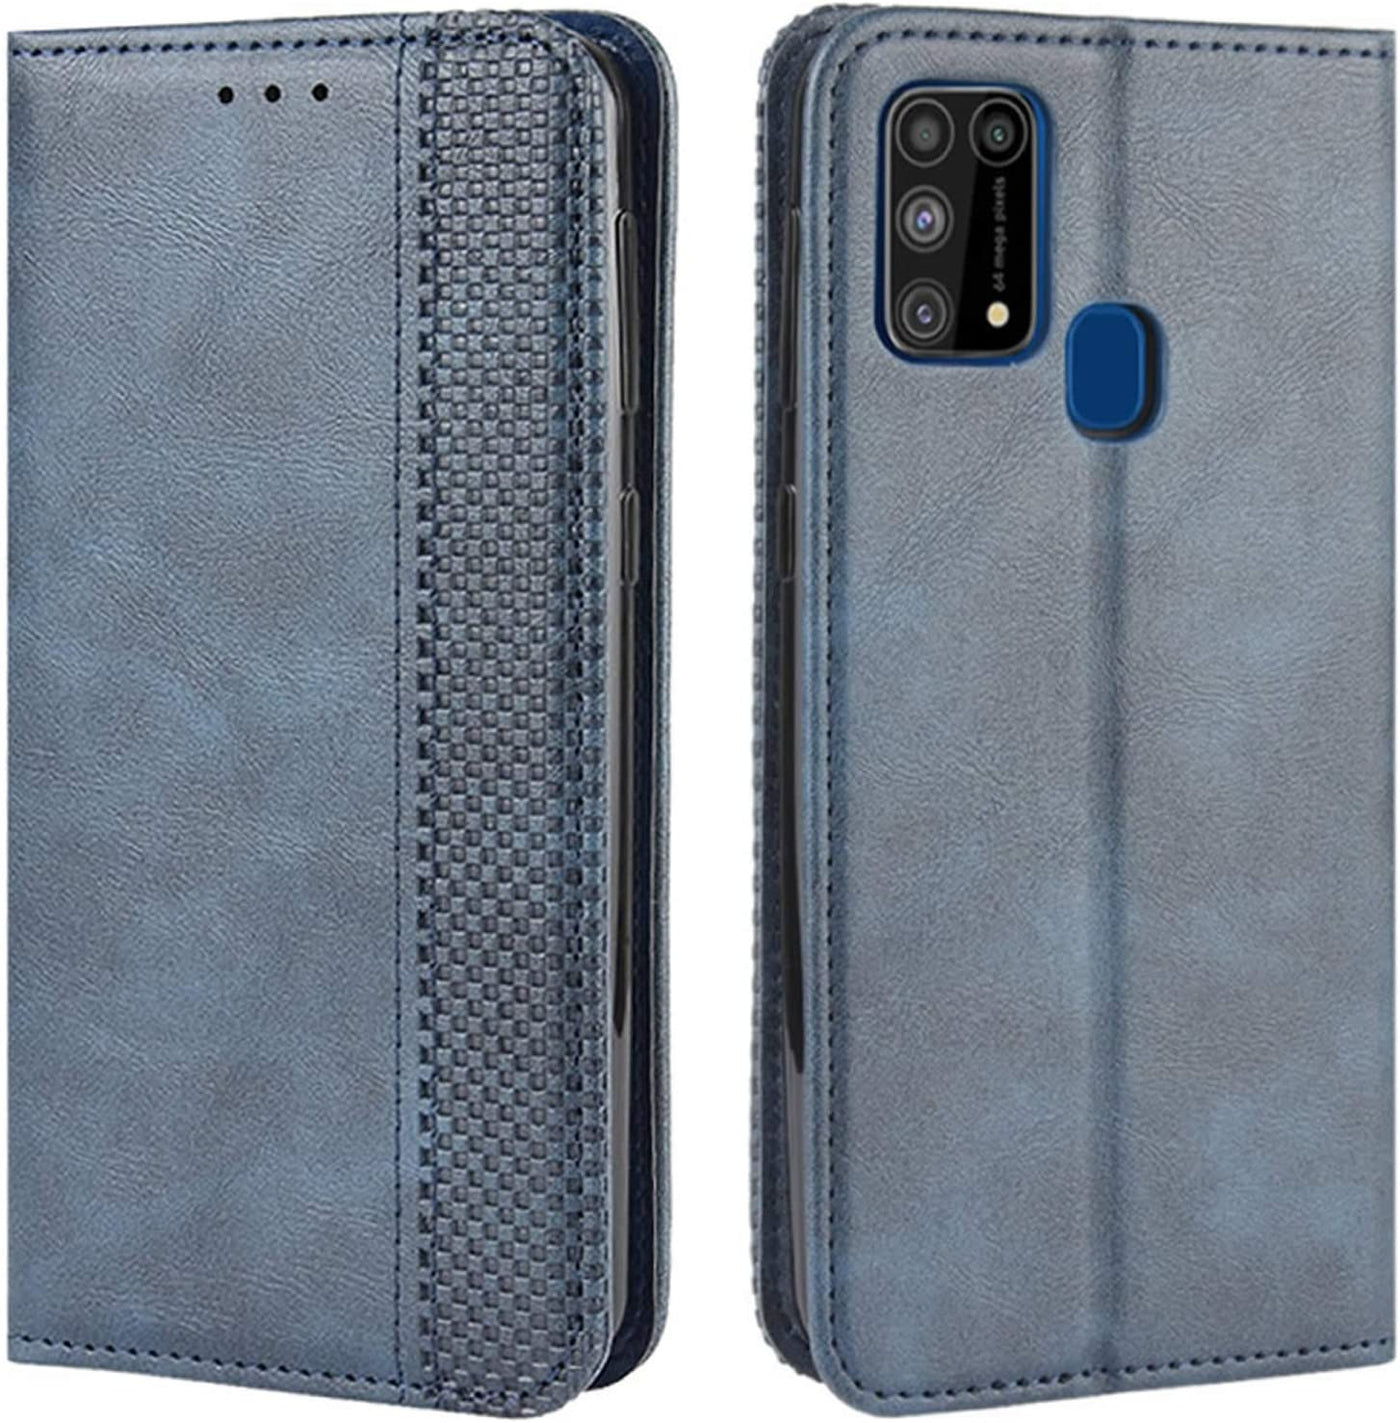 Samsung Galaxy M31 blue color leather wallet flip cover case By excelsior